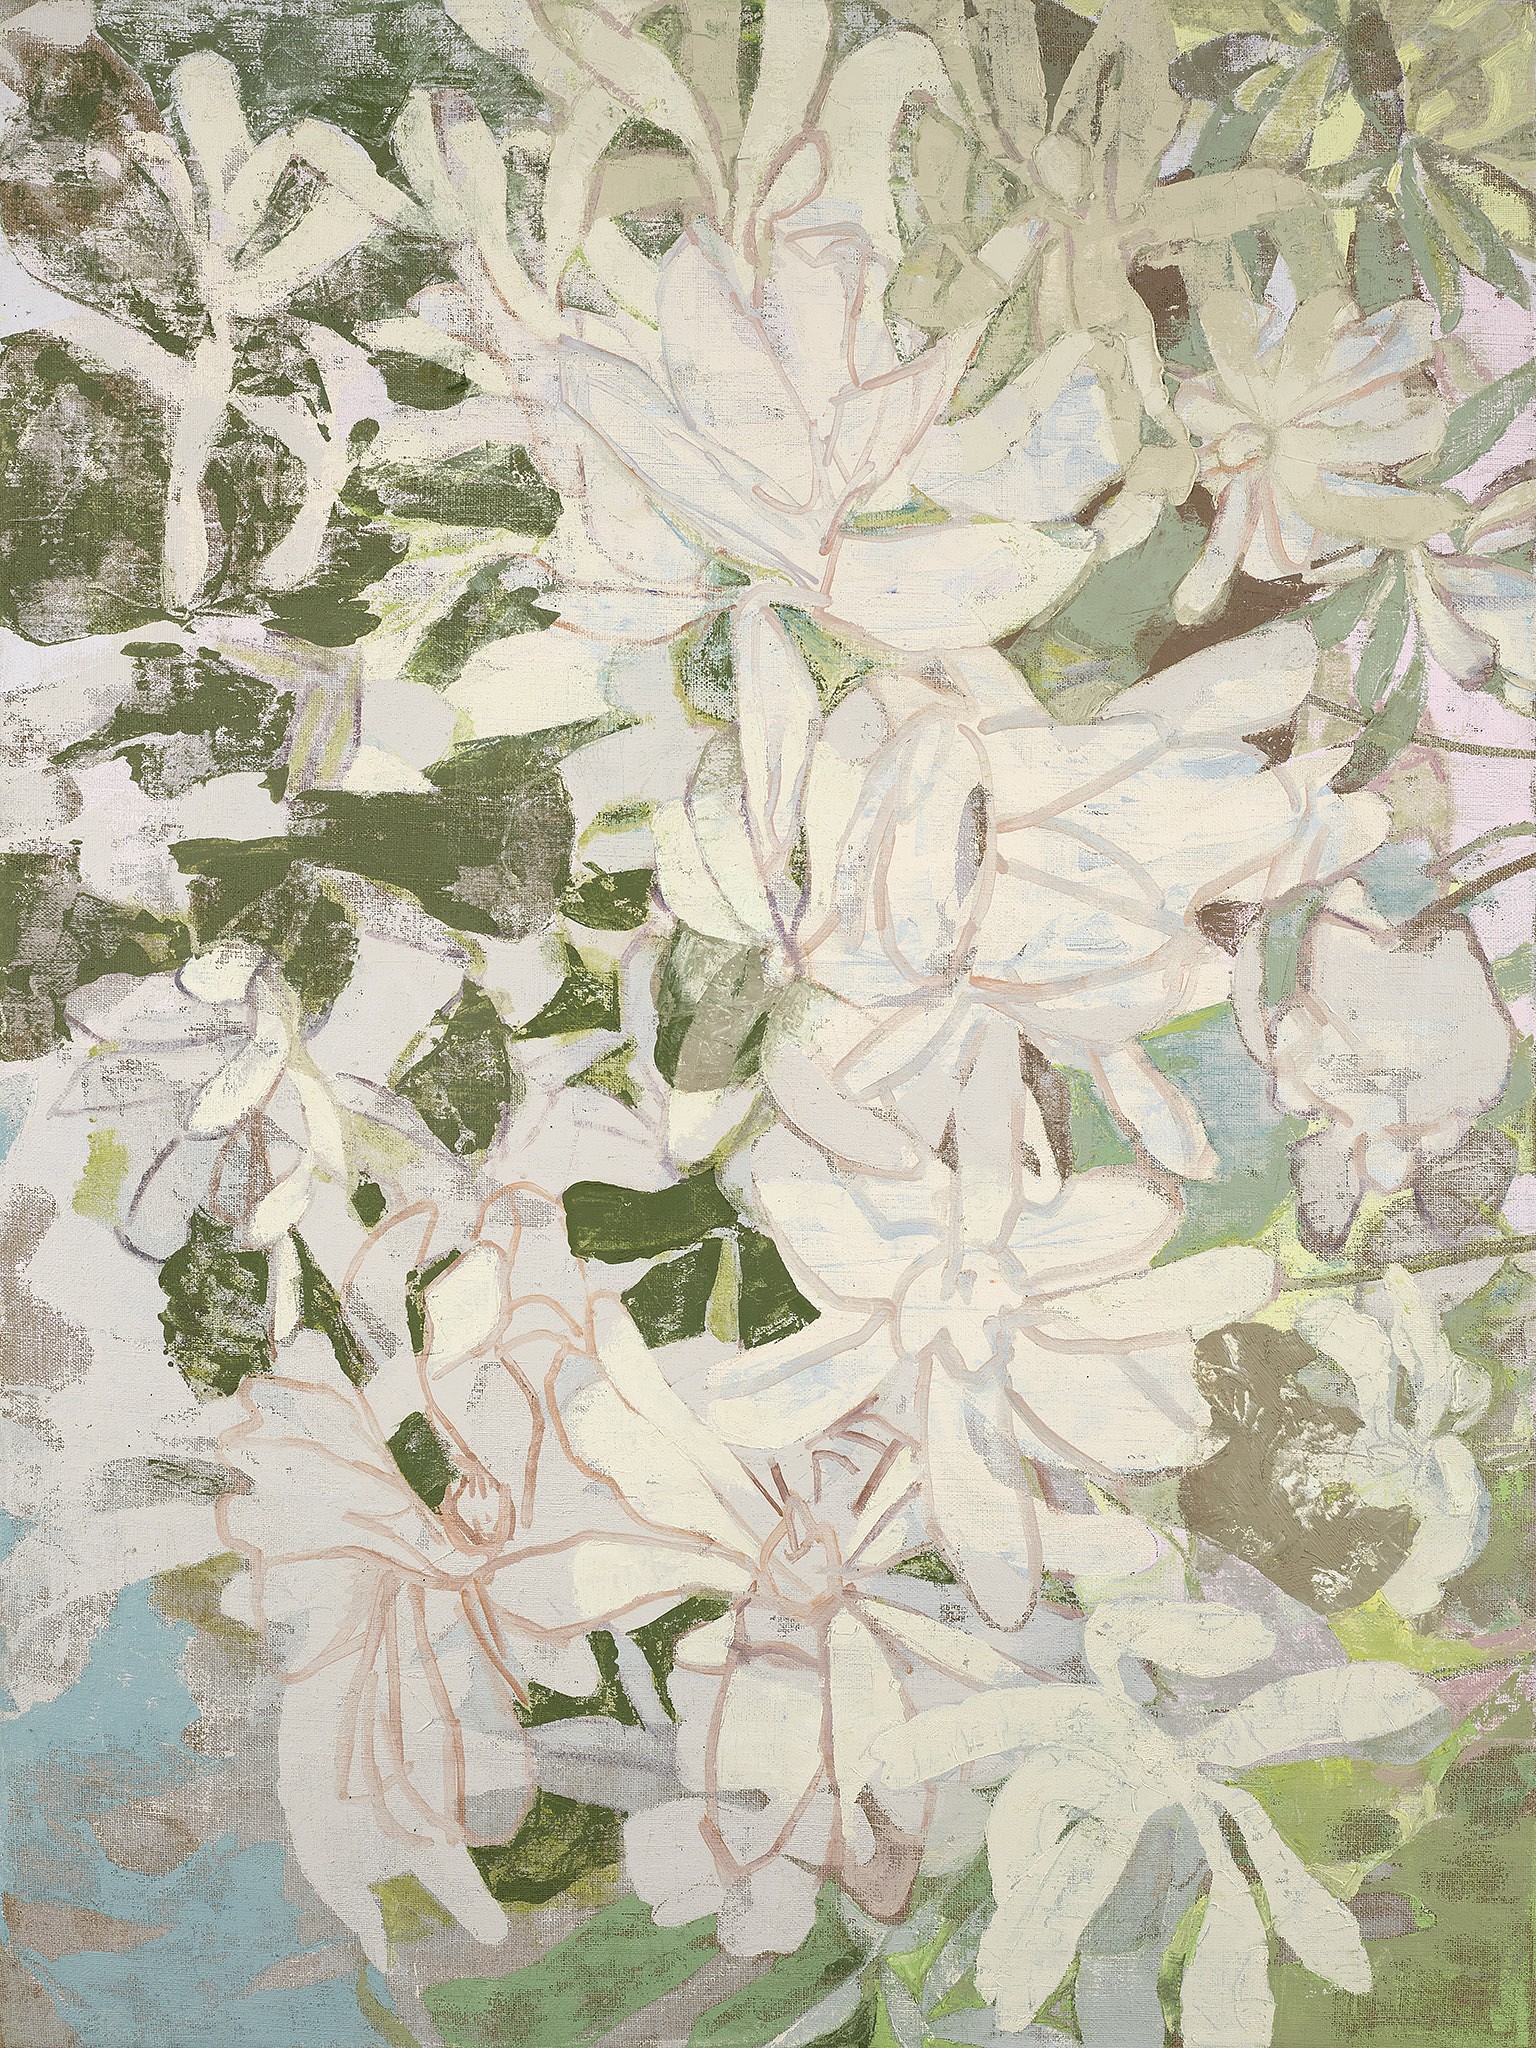 Upcoming Event | Pollock-Krasner House and Study Center | Eric Dever: Nature into Art